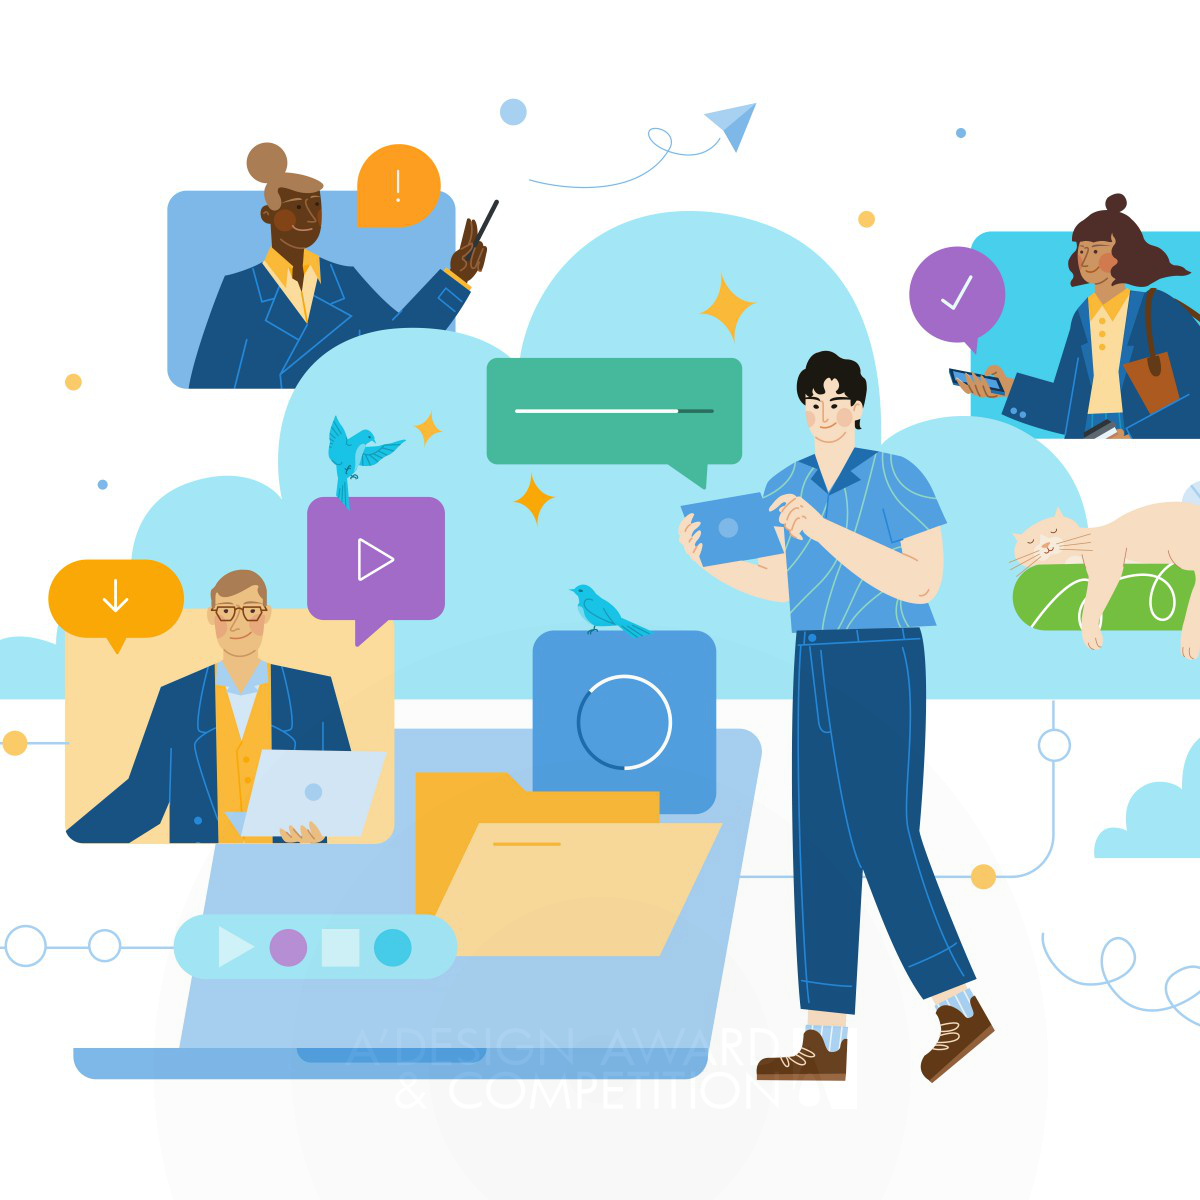 Cisco Illustration Products Need by Yidan Xie